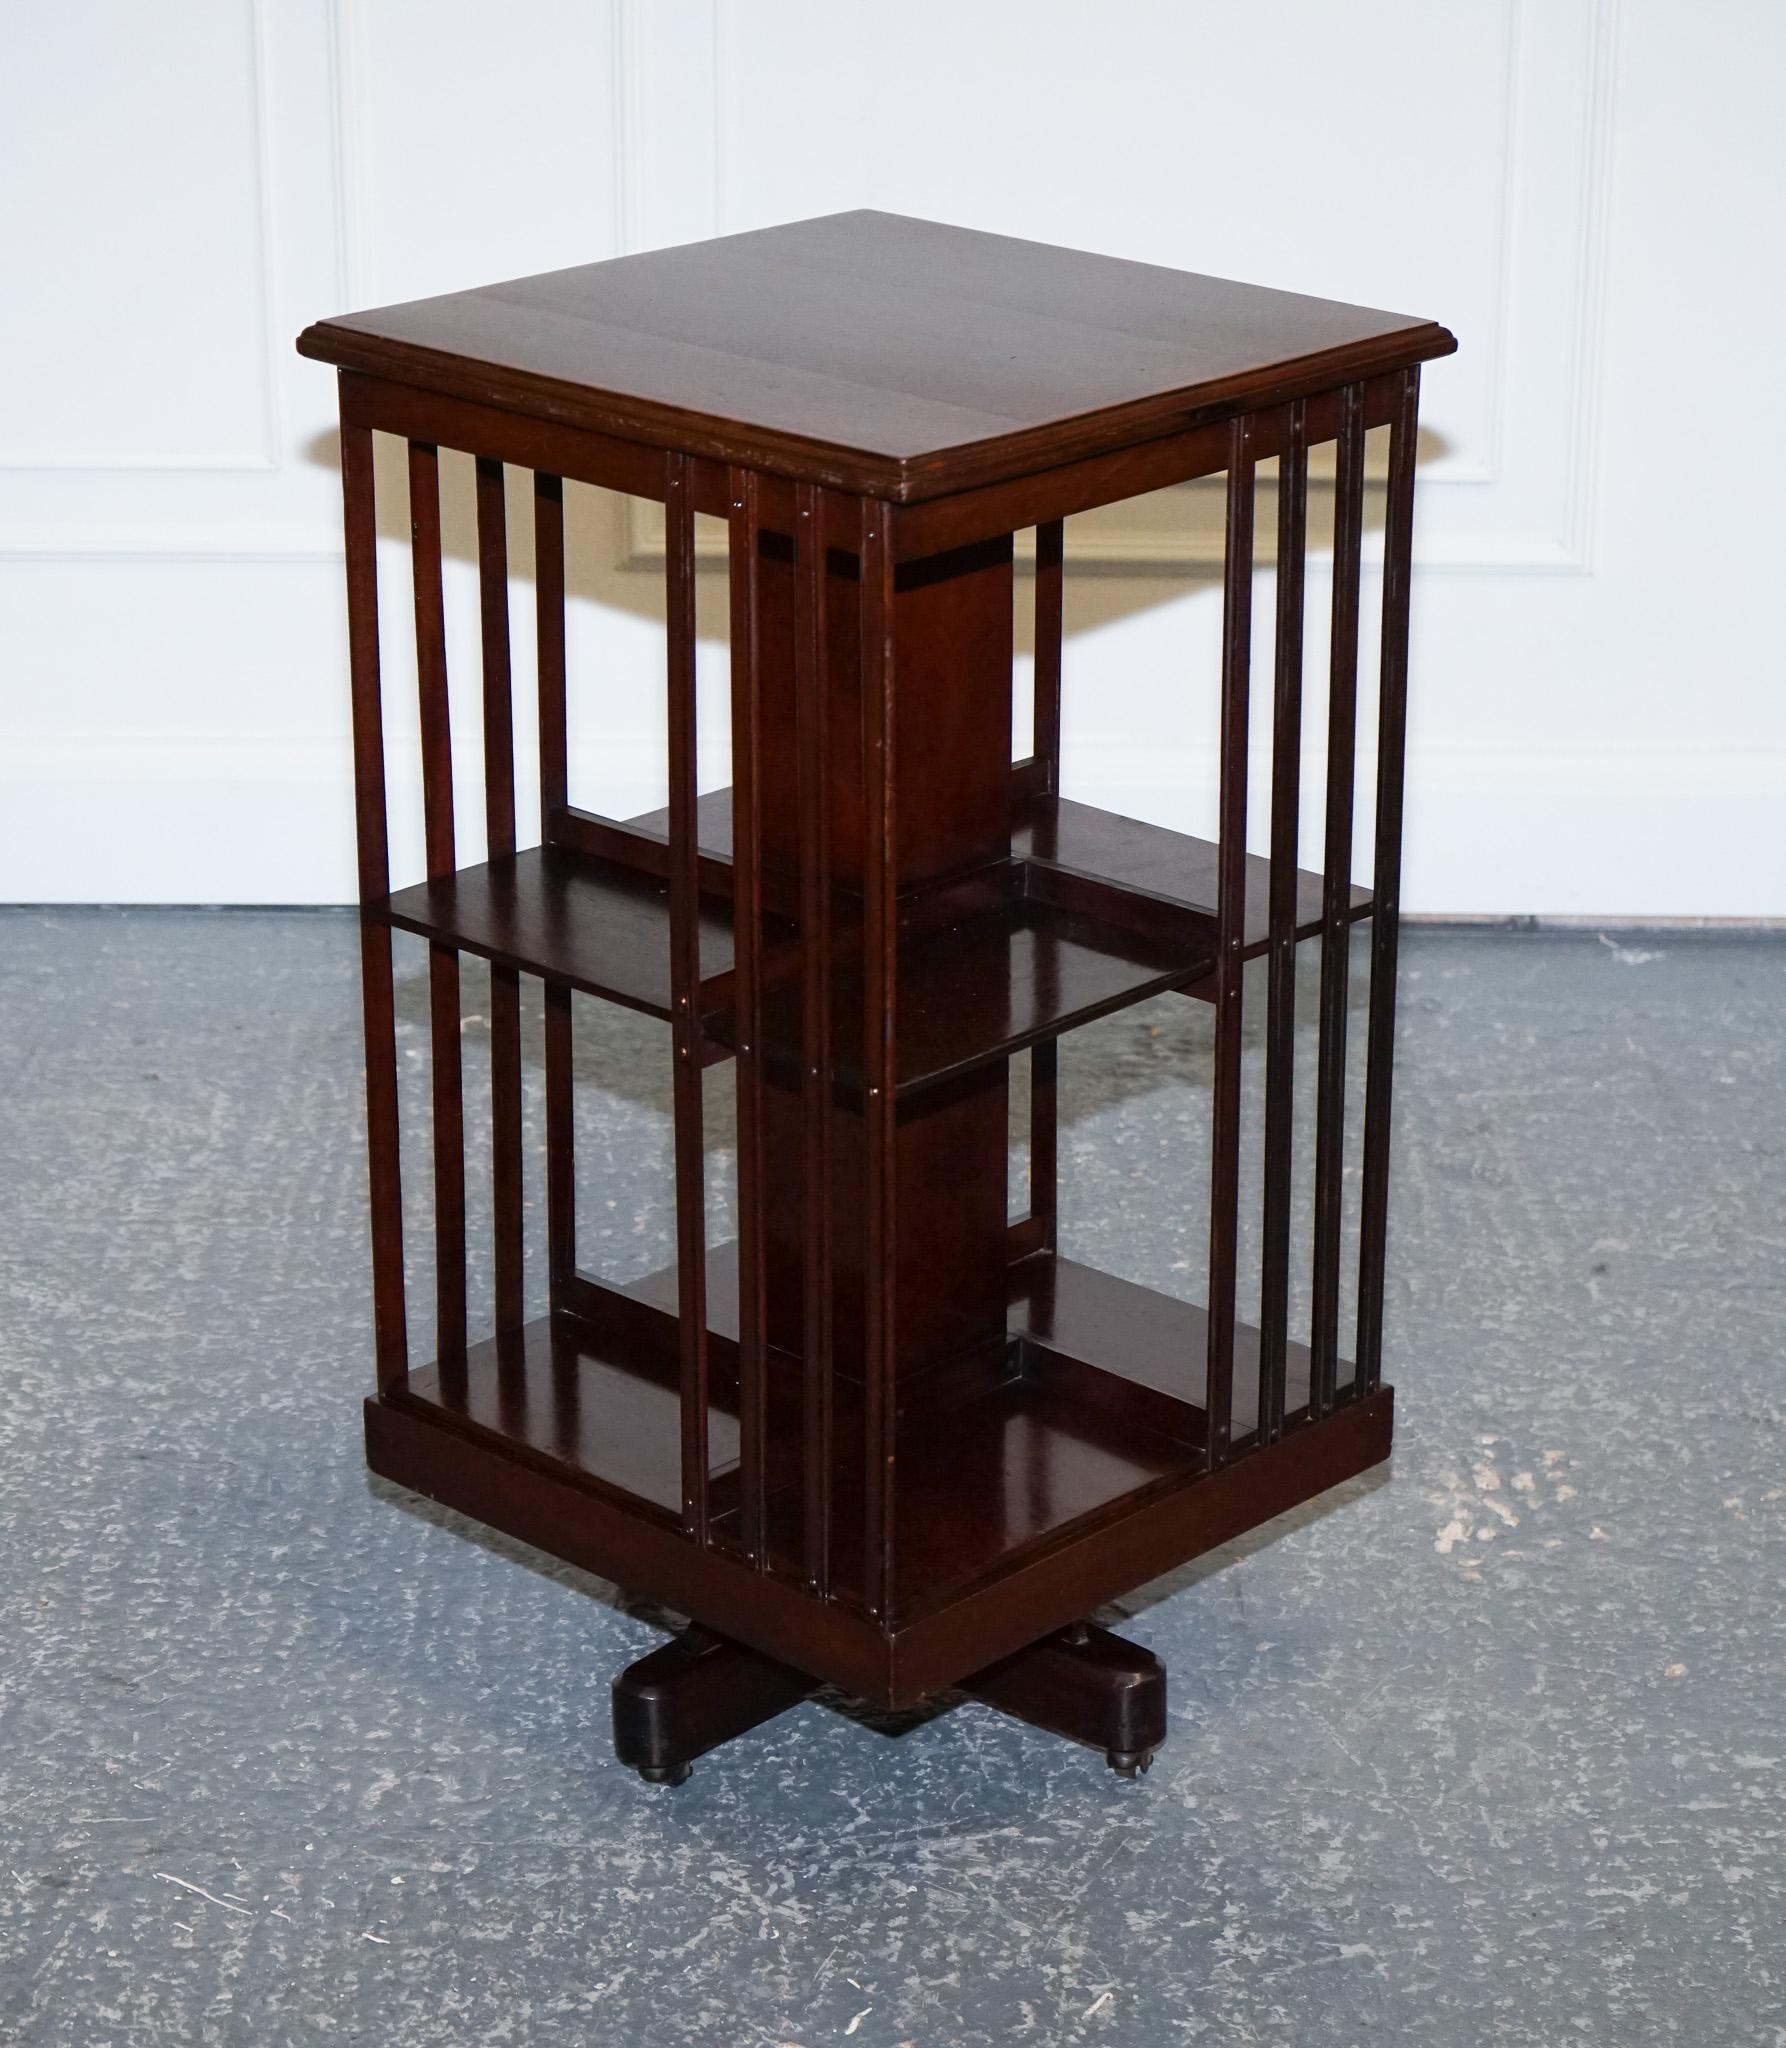 We are delighted to offer for sale this Edwardian Sheraton Revival Two Tier Revolving Bookcase.
The Edwardian Sheraton Revival Two-Tier Revolving Bookcase is a stunning piece of furniture that became popular in the early 20th century.
This bookcase